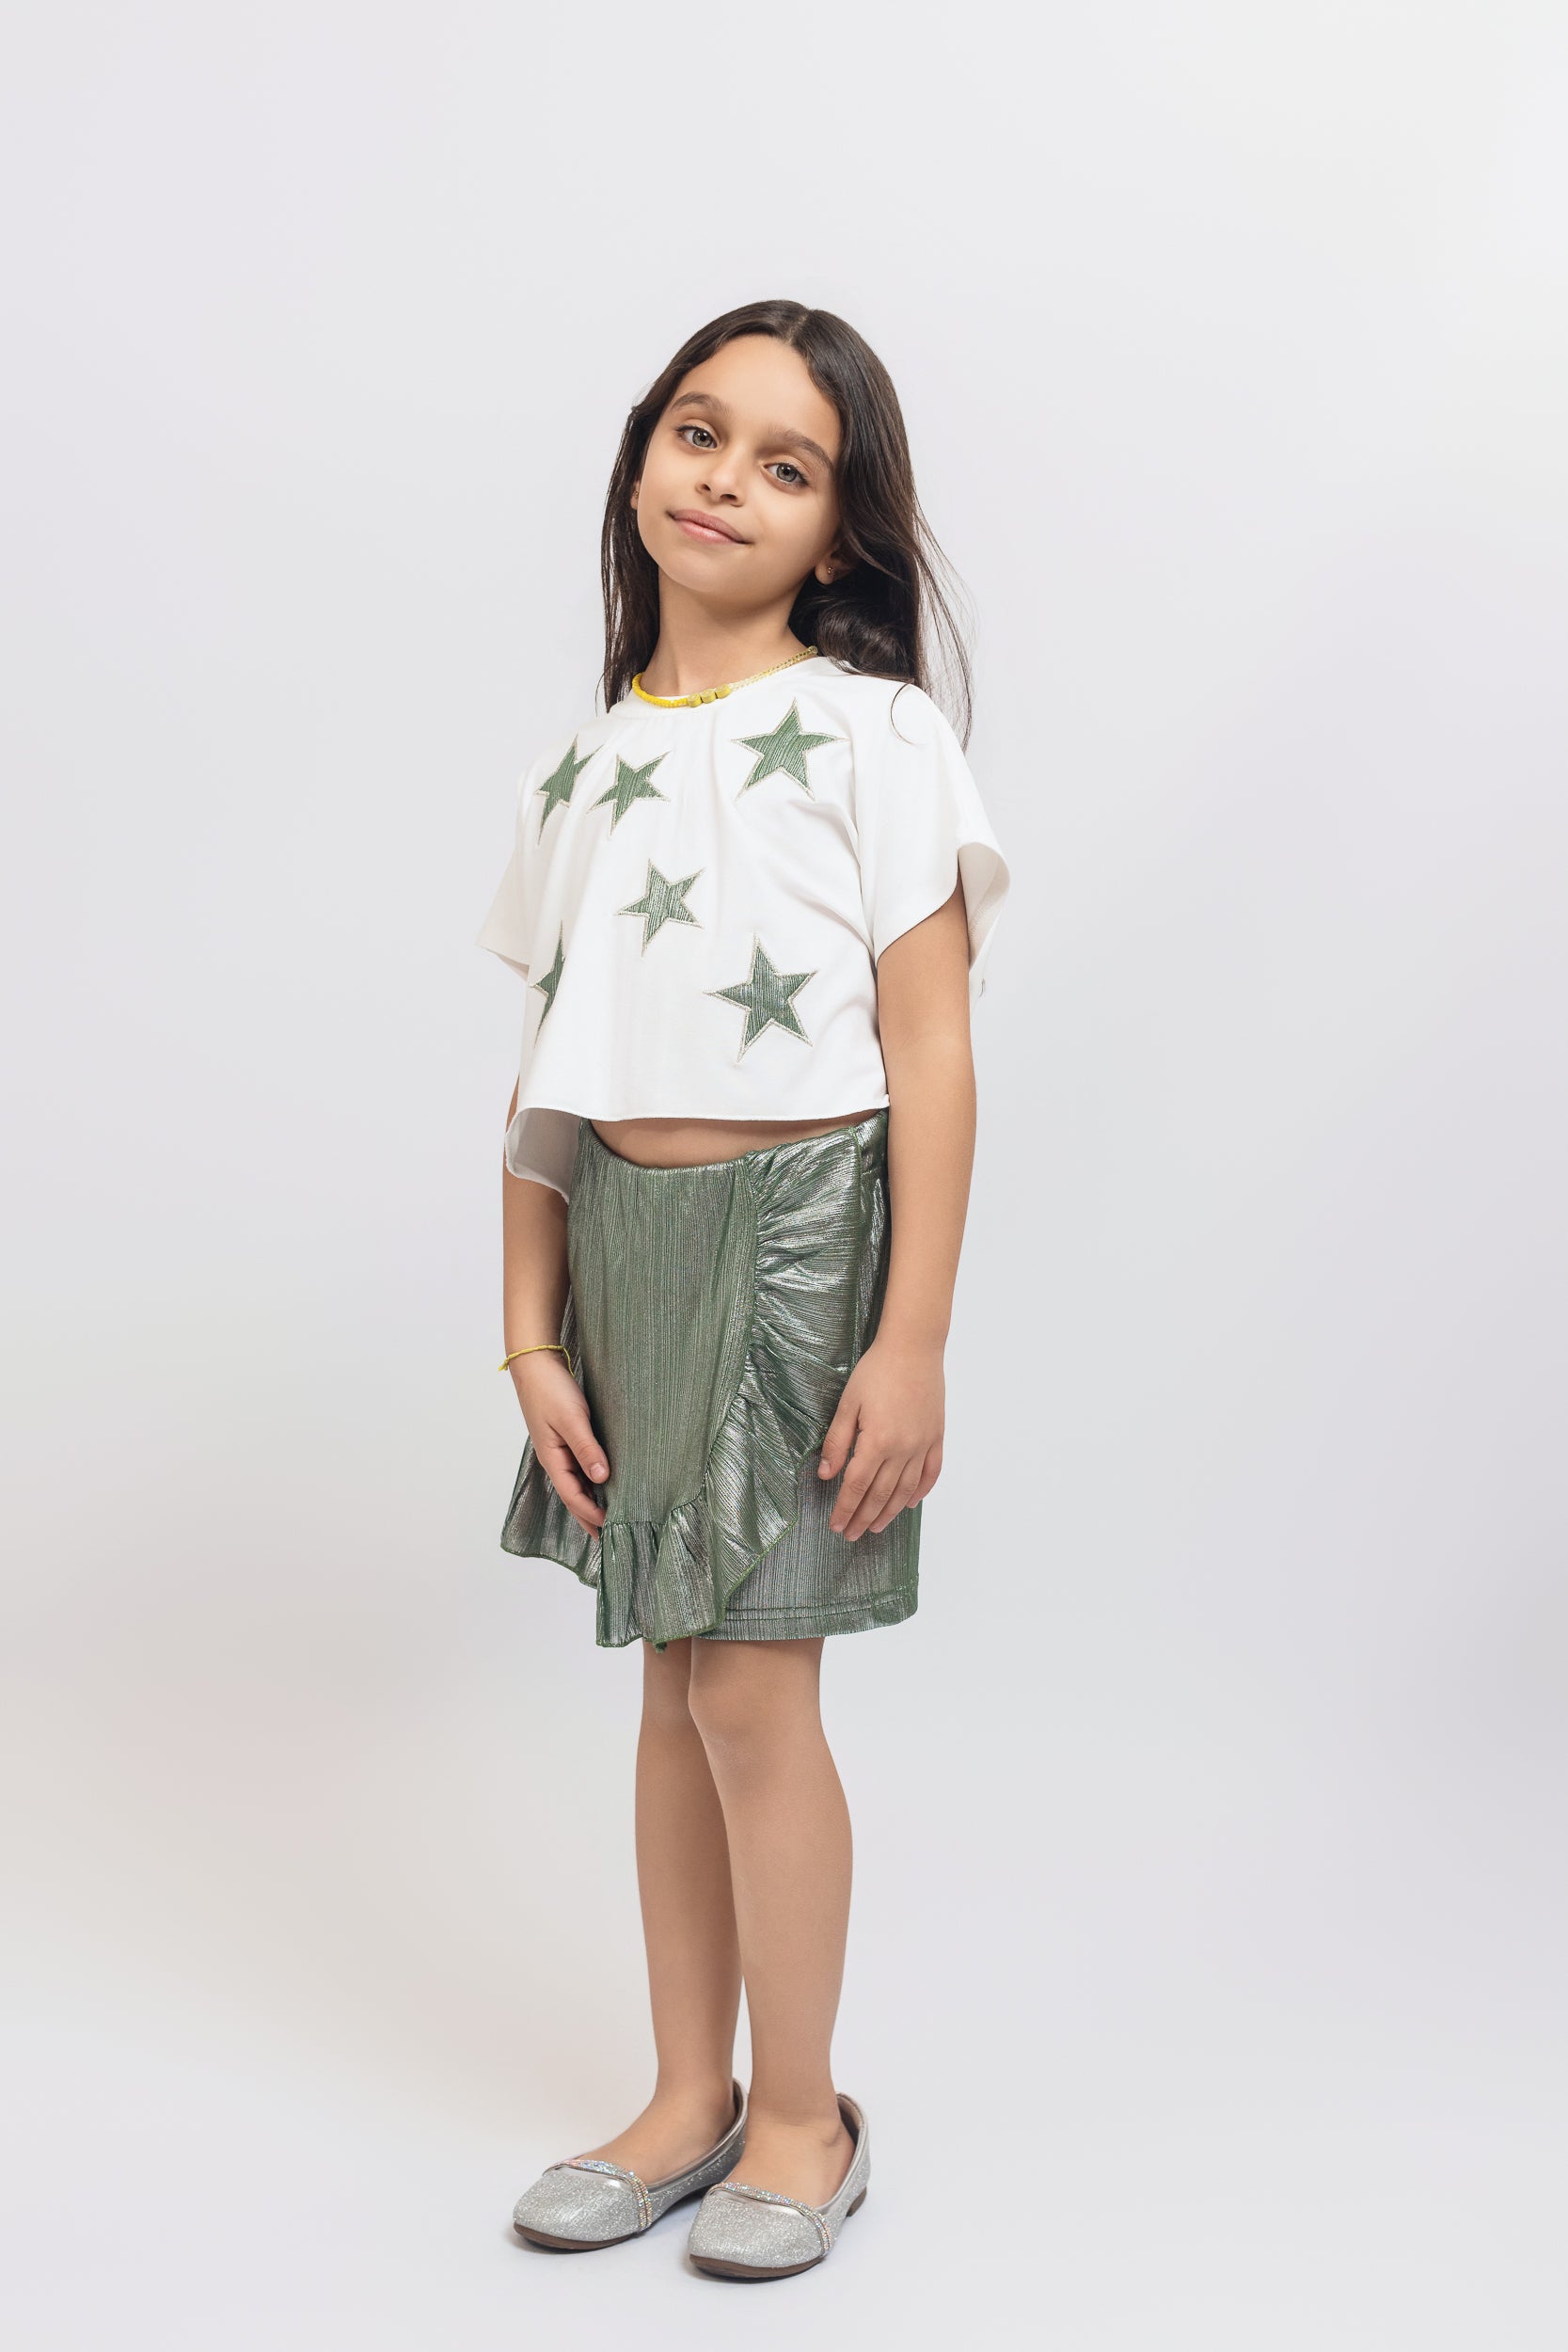 Shiny Star Top For Girls - Off White